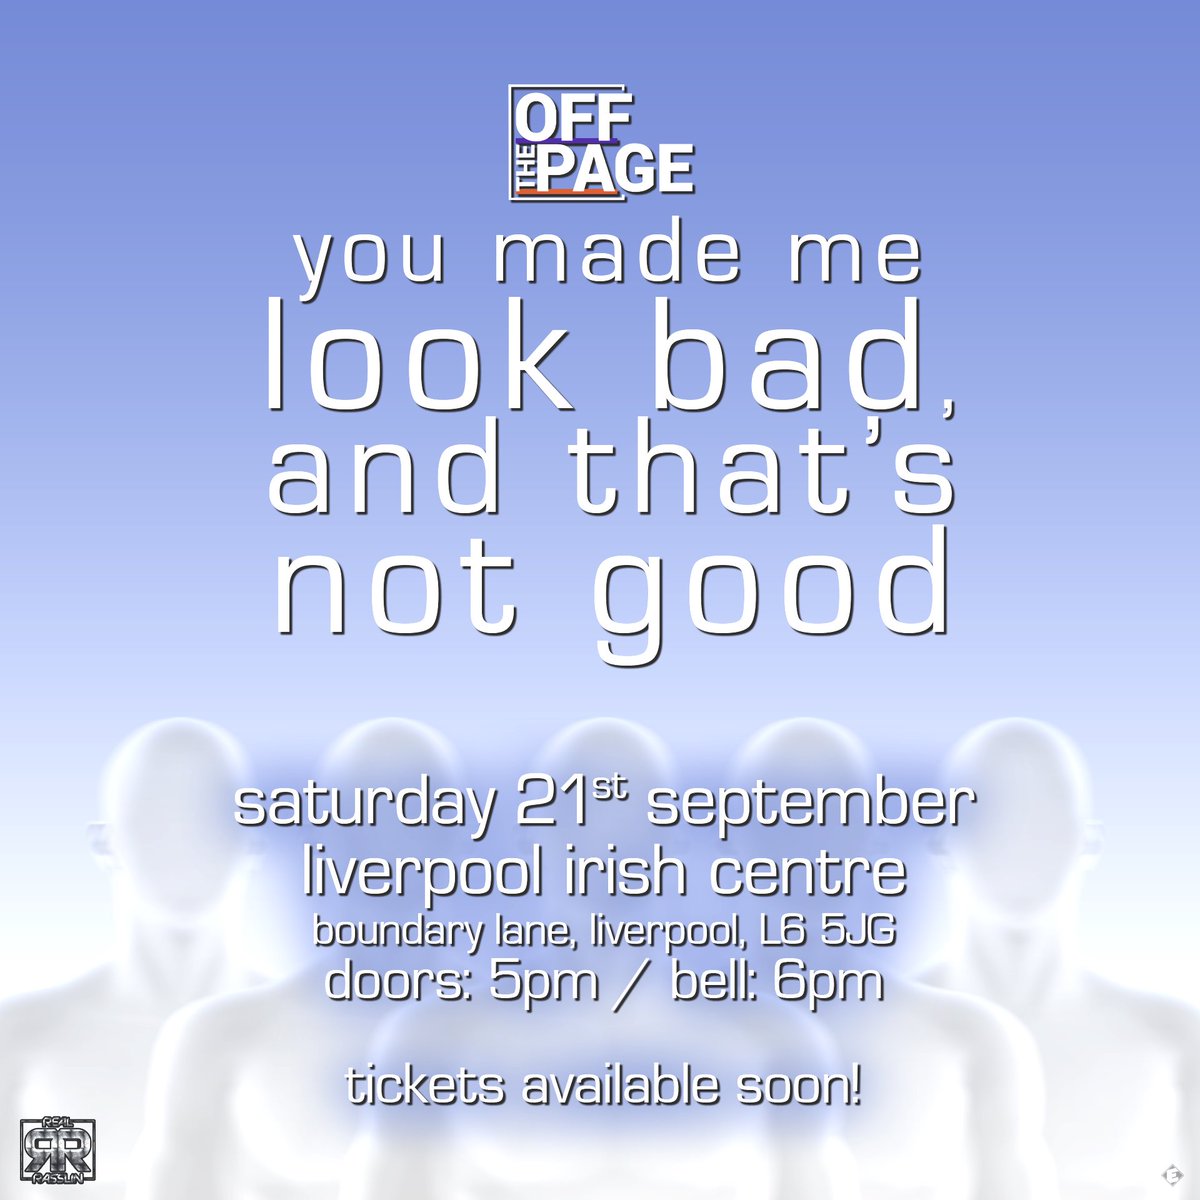 🚨 TICKETS NOW AVAILABLE 🚨 Tickets for our show in Liverpool, You Made Me Look Bad... are now on sale on Skiddle! Get yours as we bring OTP to Beatle Country on September 21st! Tickets on sale here: skiddle.com/whats-on/Liver…